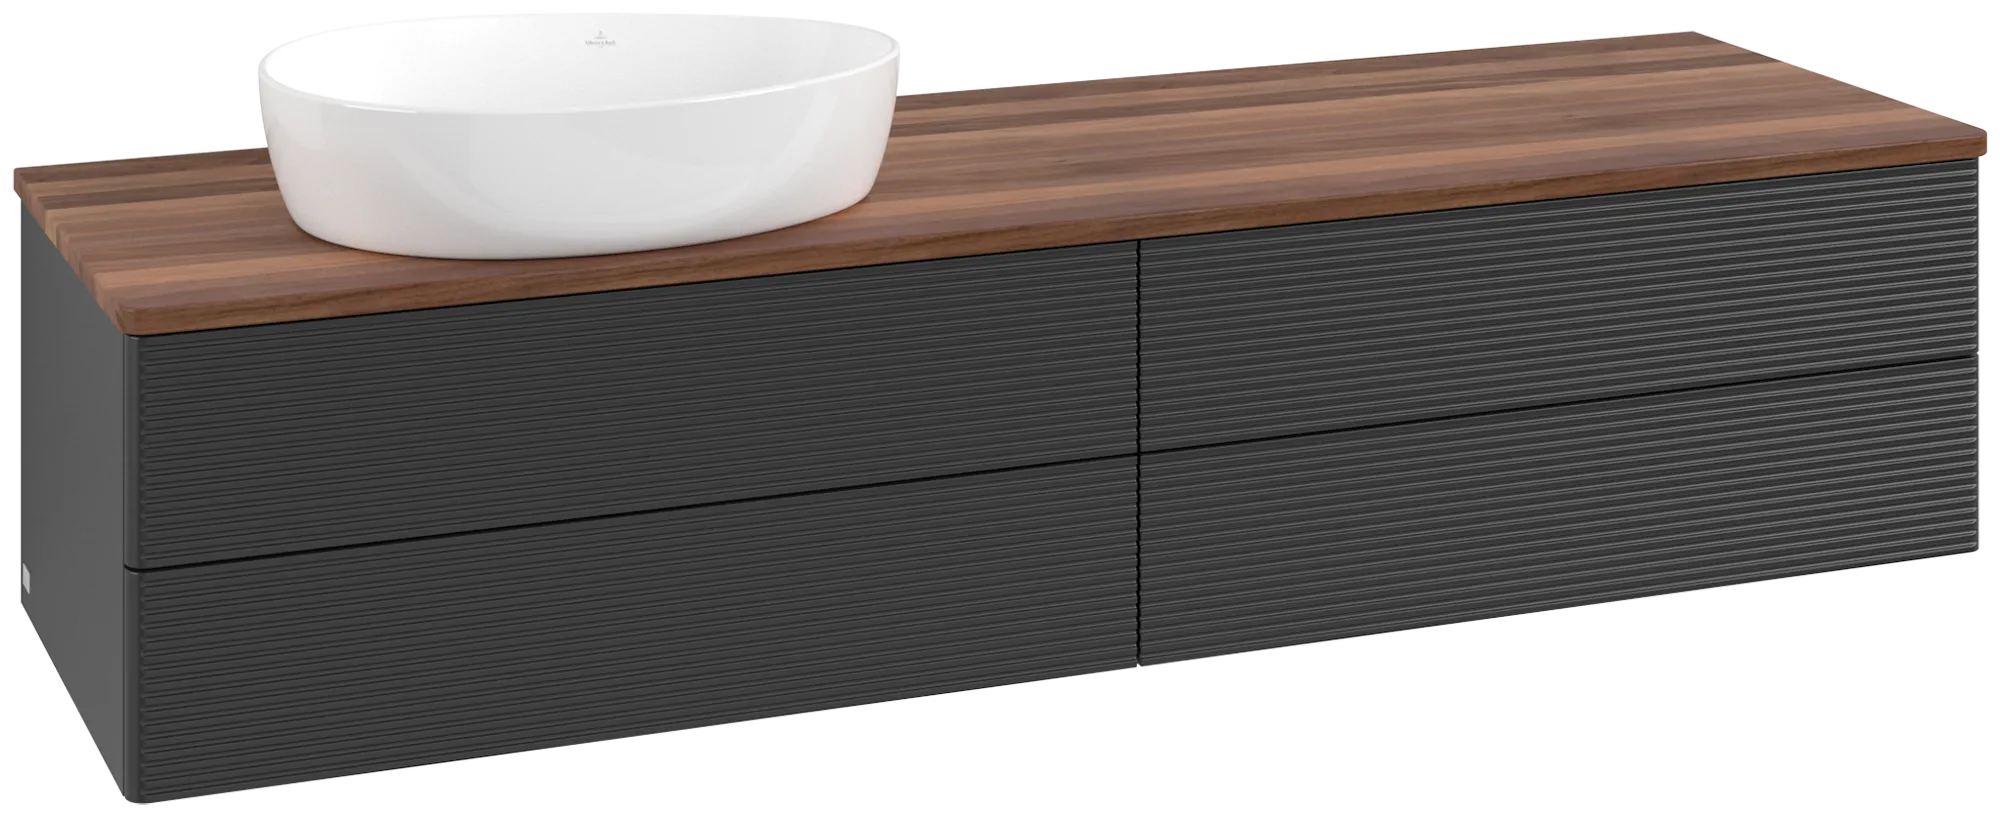 Picture of VILLEROY BOCH Antao Vanity unit, with lighting, 4 pull-out compartments, 1600 x 360 x 500 mm, Front with grain texture, Black Matt Lacquer / Warm Walnut #L26112PD